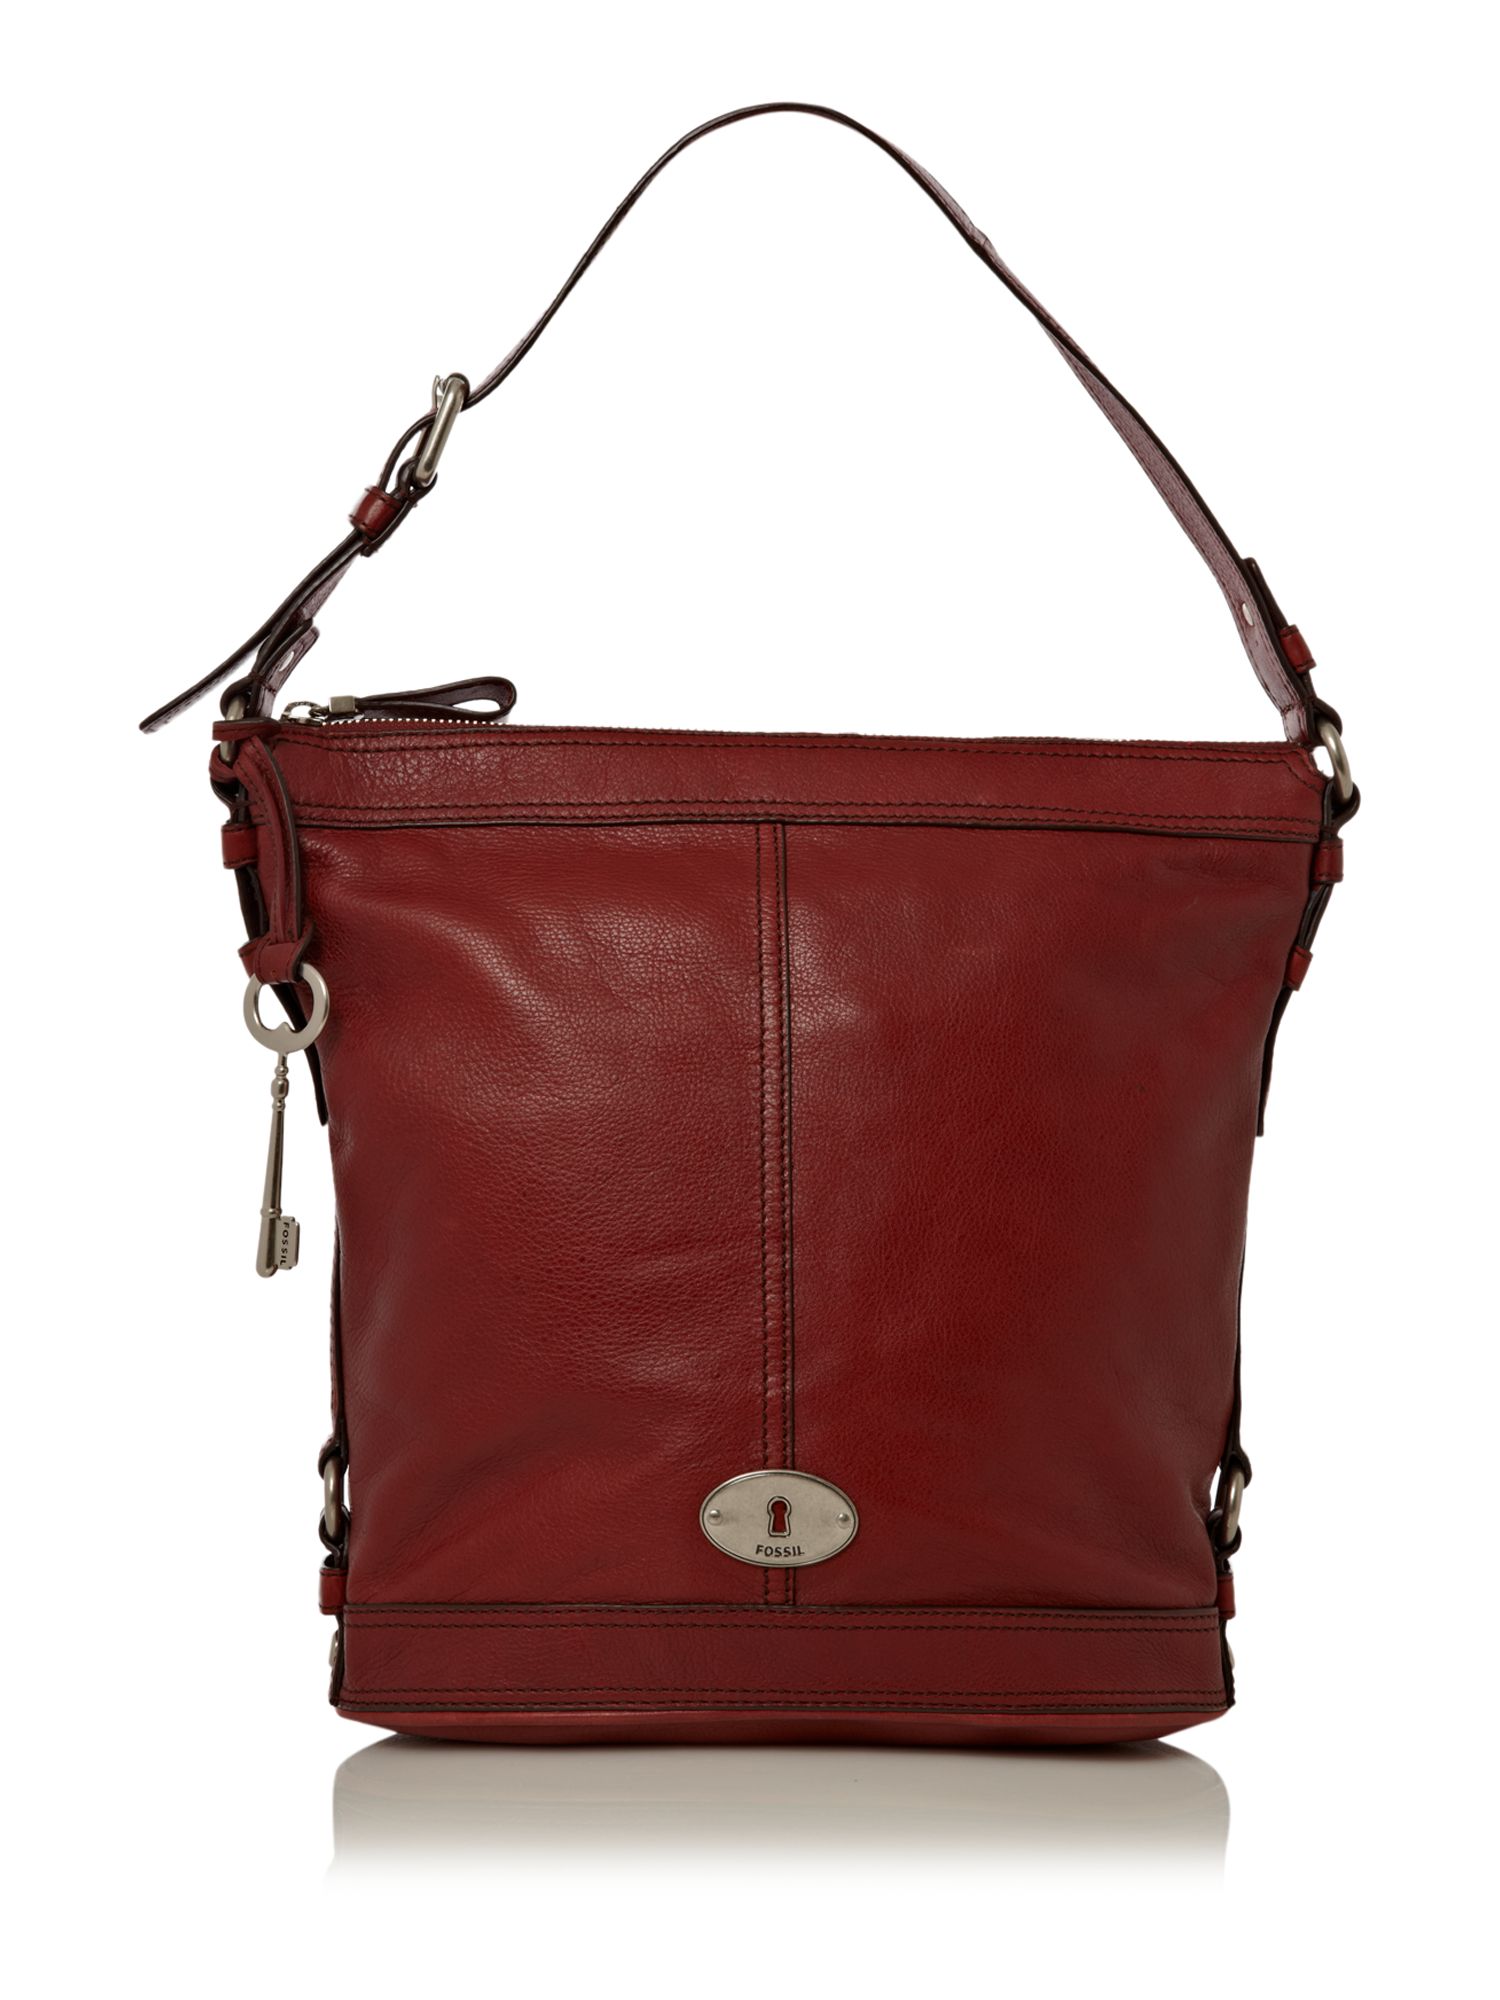 Fossil Maddox Bucket Bag in Brown (red) | Lyst